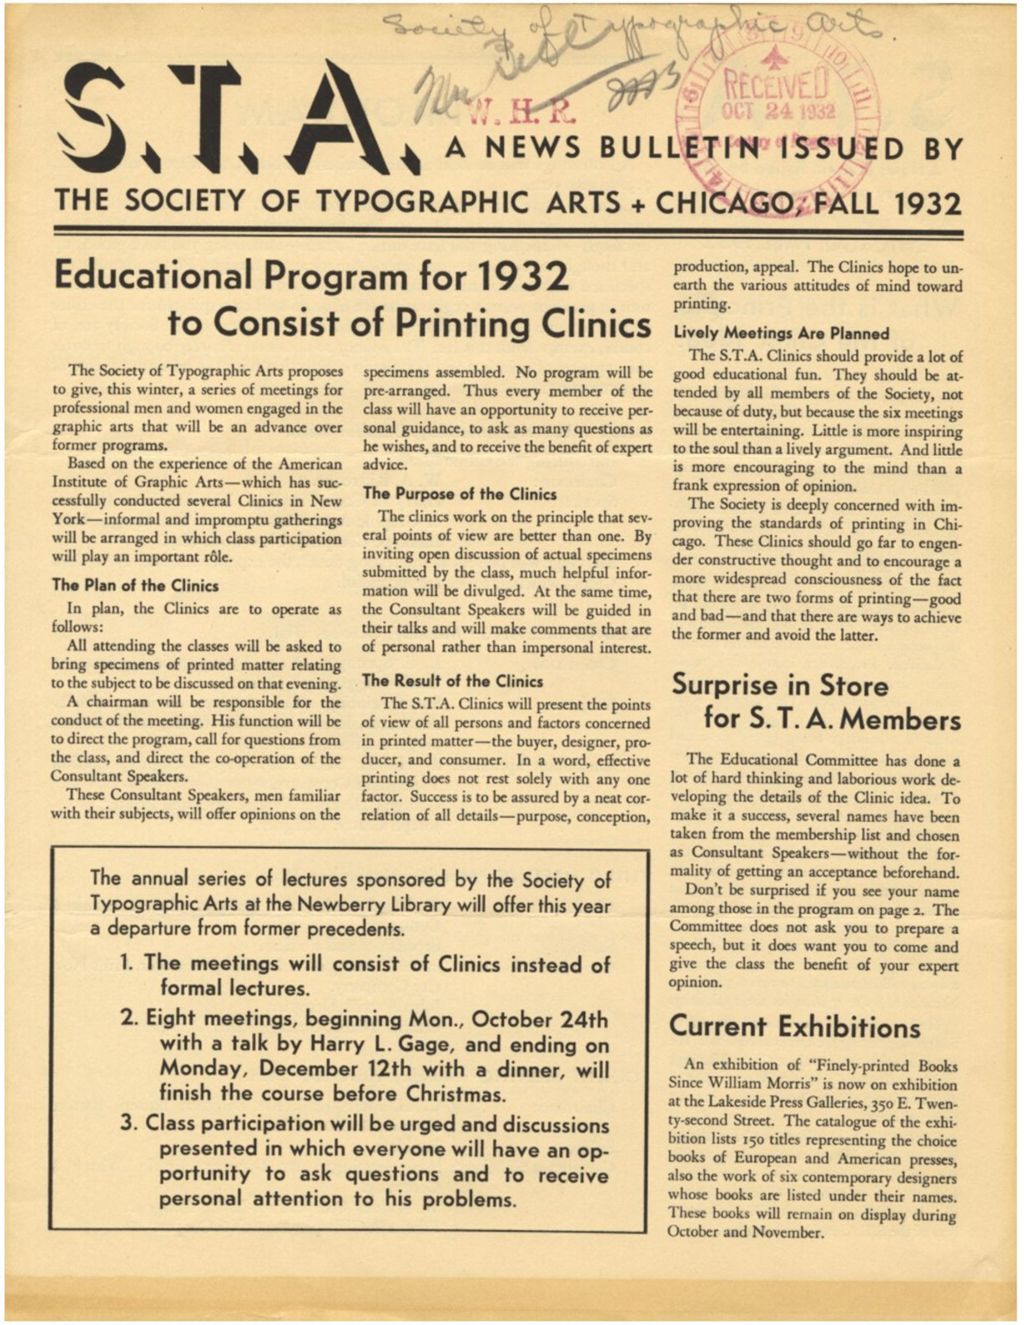 Miniature of STA News Bulletin noting development of plans for a Graphic Arts Exhibit at the Century of Progress